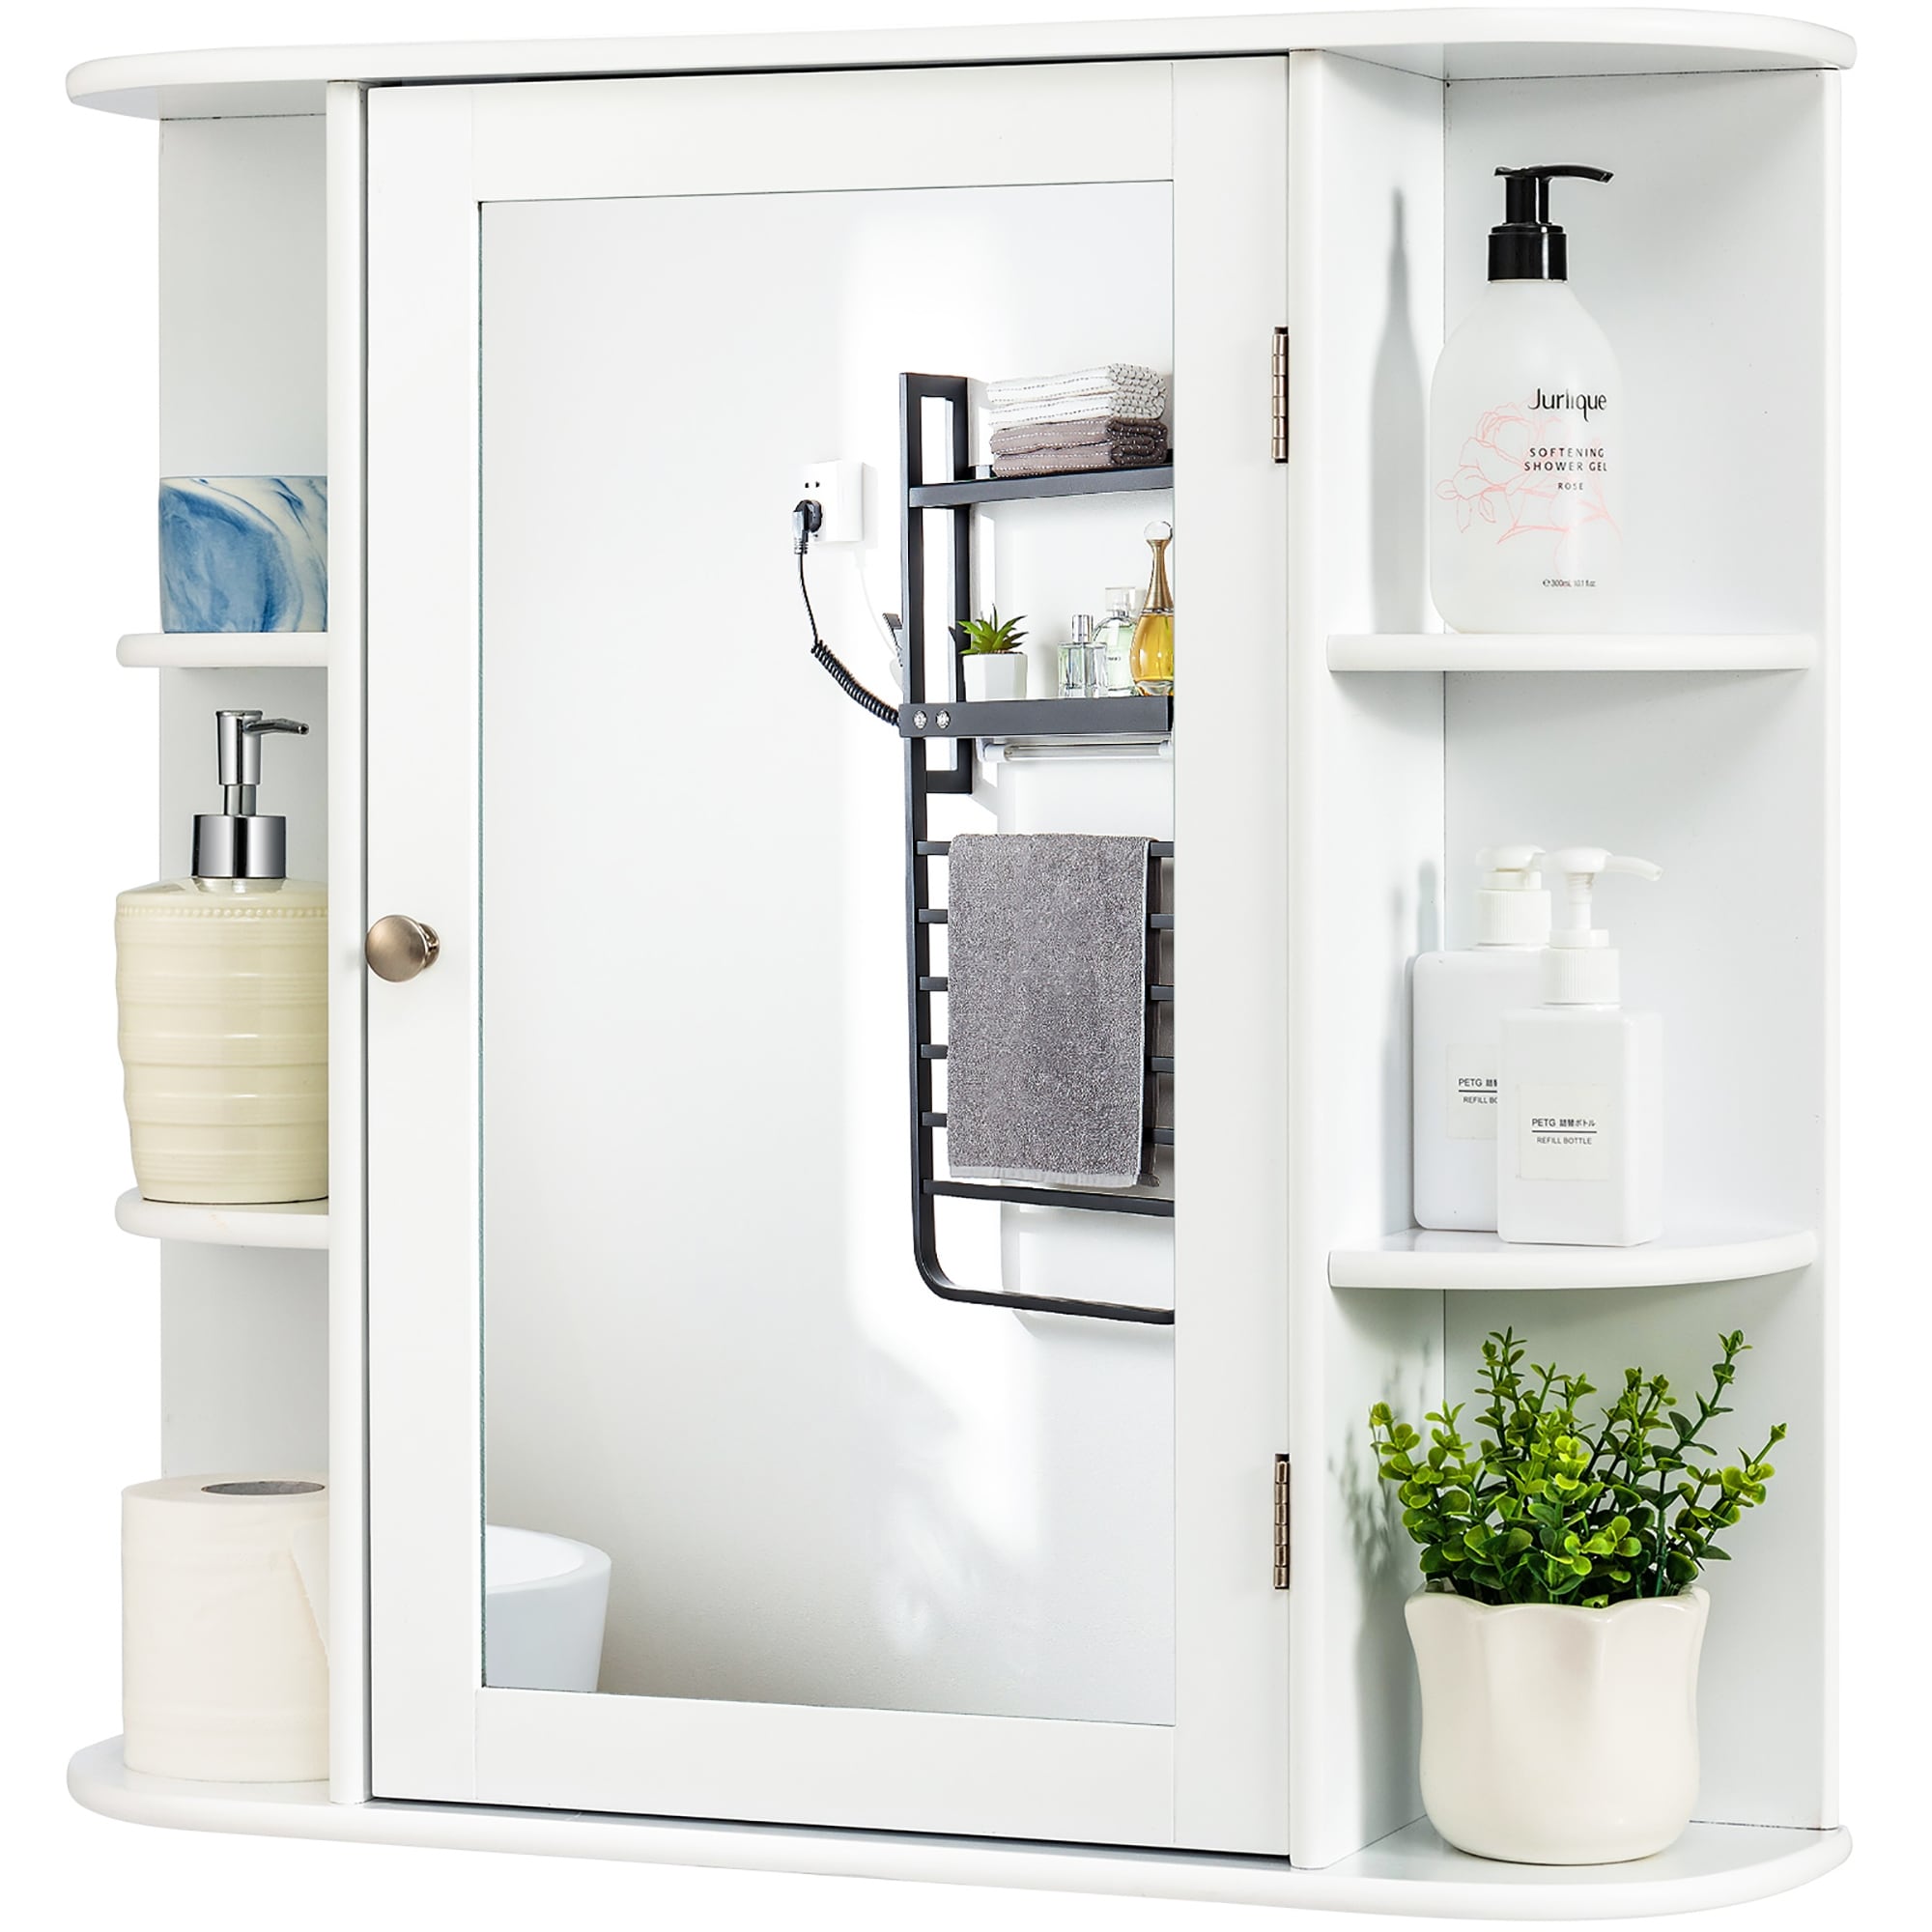 https://ak1.ostkcdn.com/images/products/is/images/direct/5e1b9fe485f5a6c7bc431b46d70fe6344518f897/Wall-Mounted-Bathroom-Storage-Cabinet-Medicine-Cabinet-with-Mirror.jpg